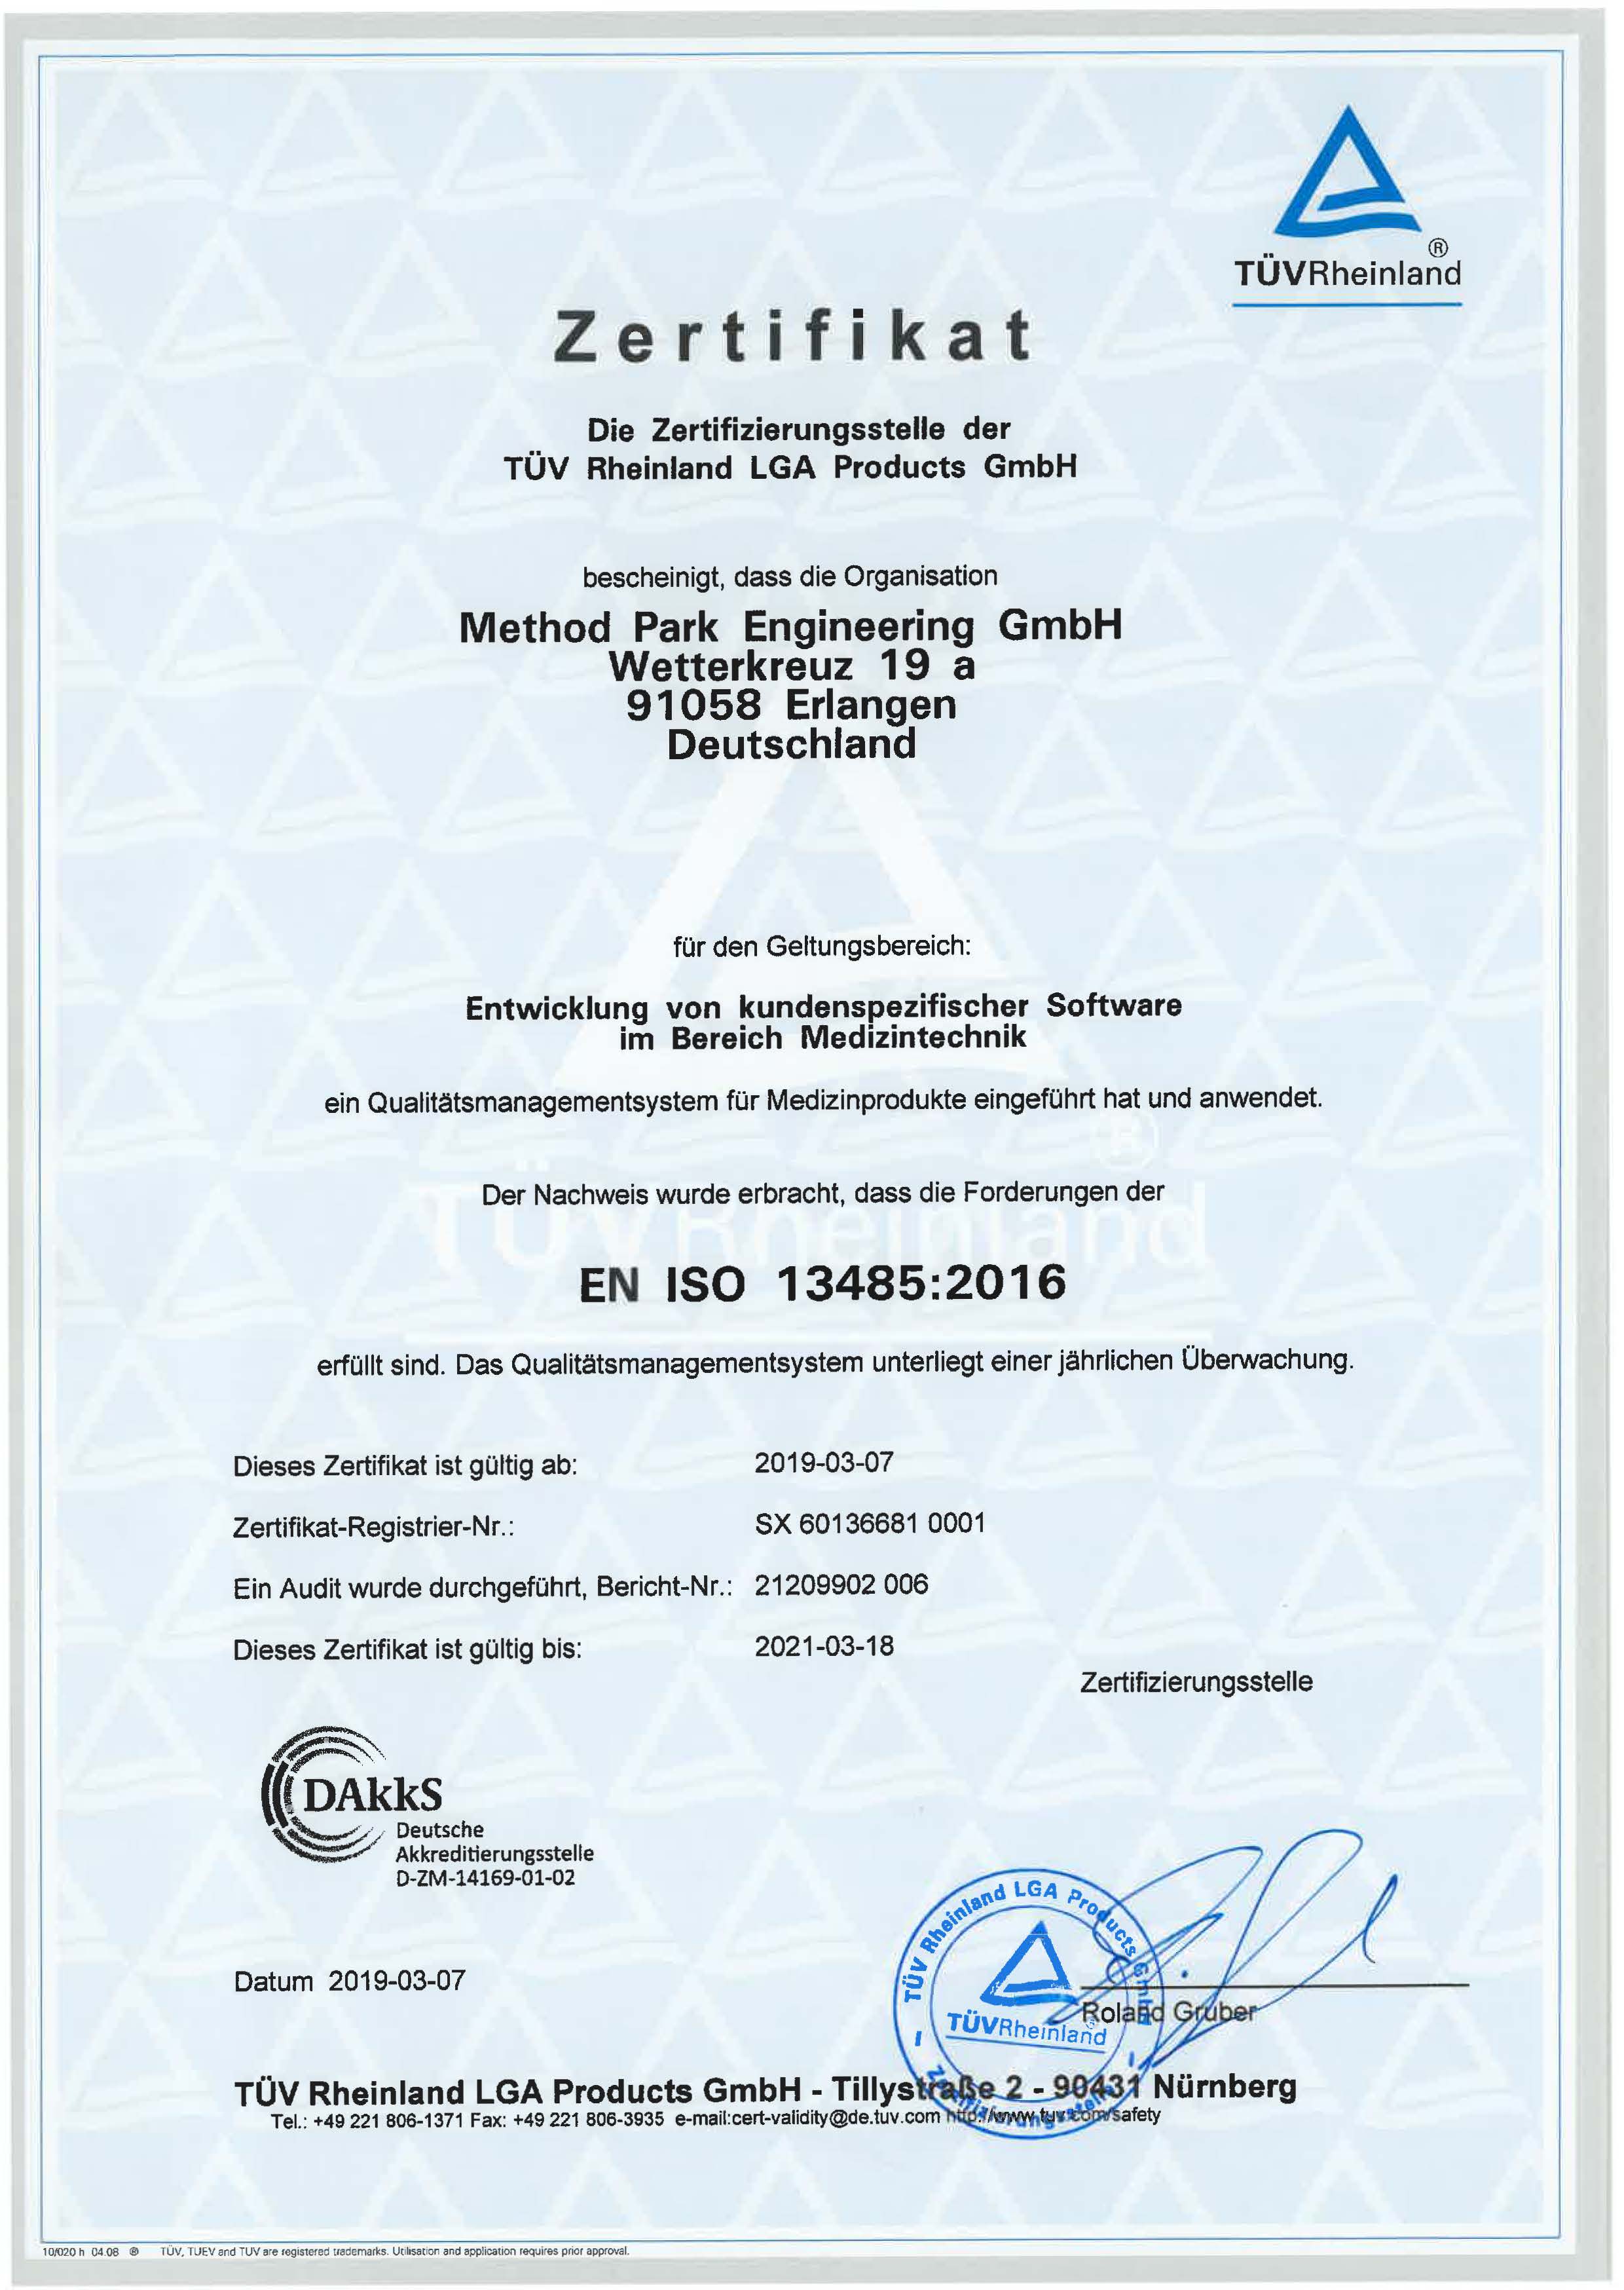 Method Park successfully re-certified according to DIN EN ISO 13485:2016